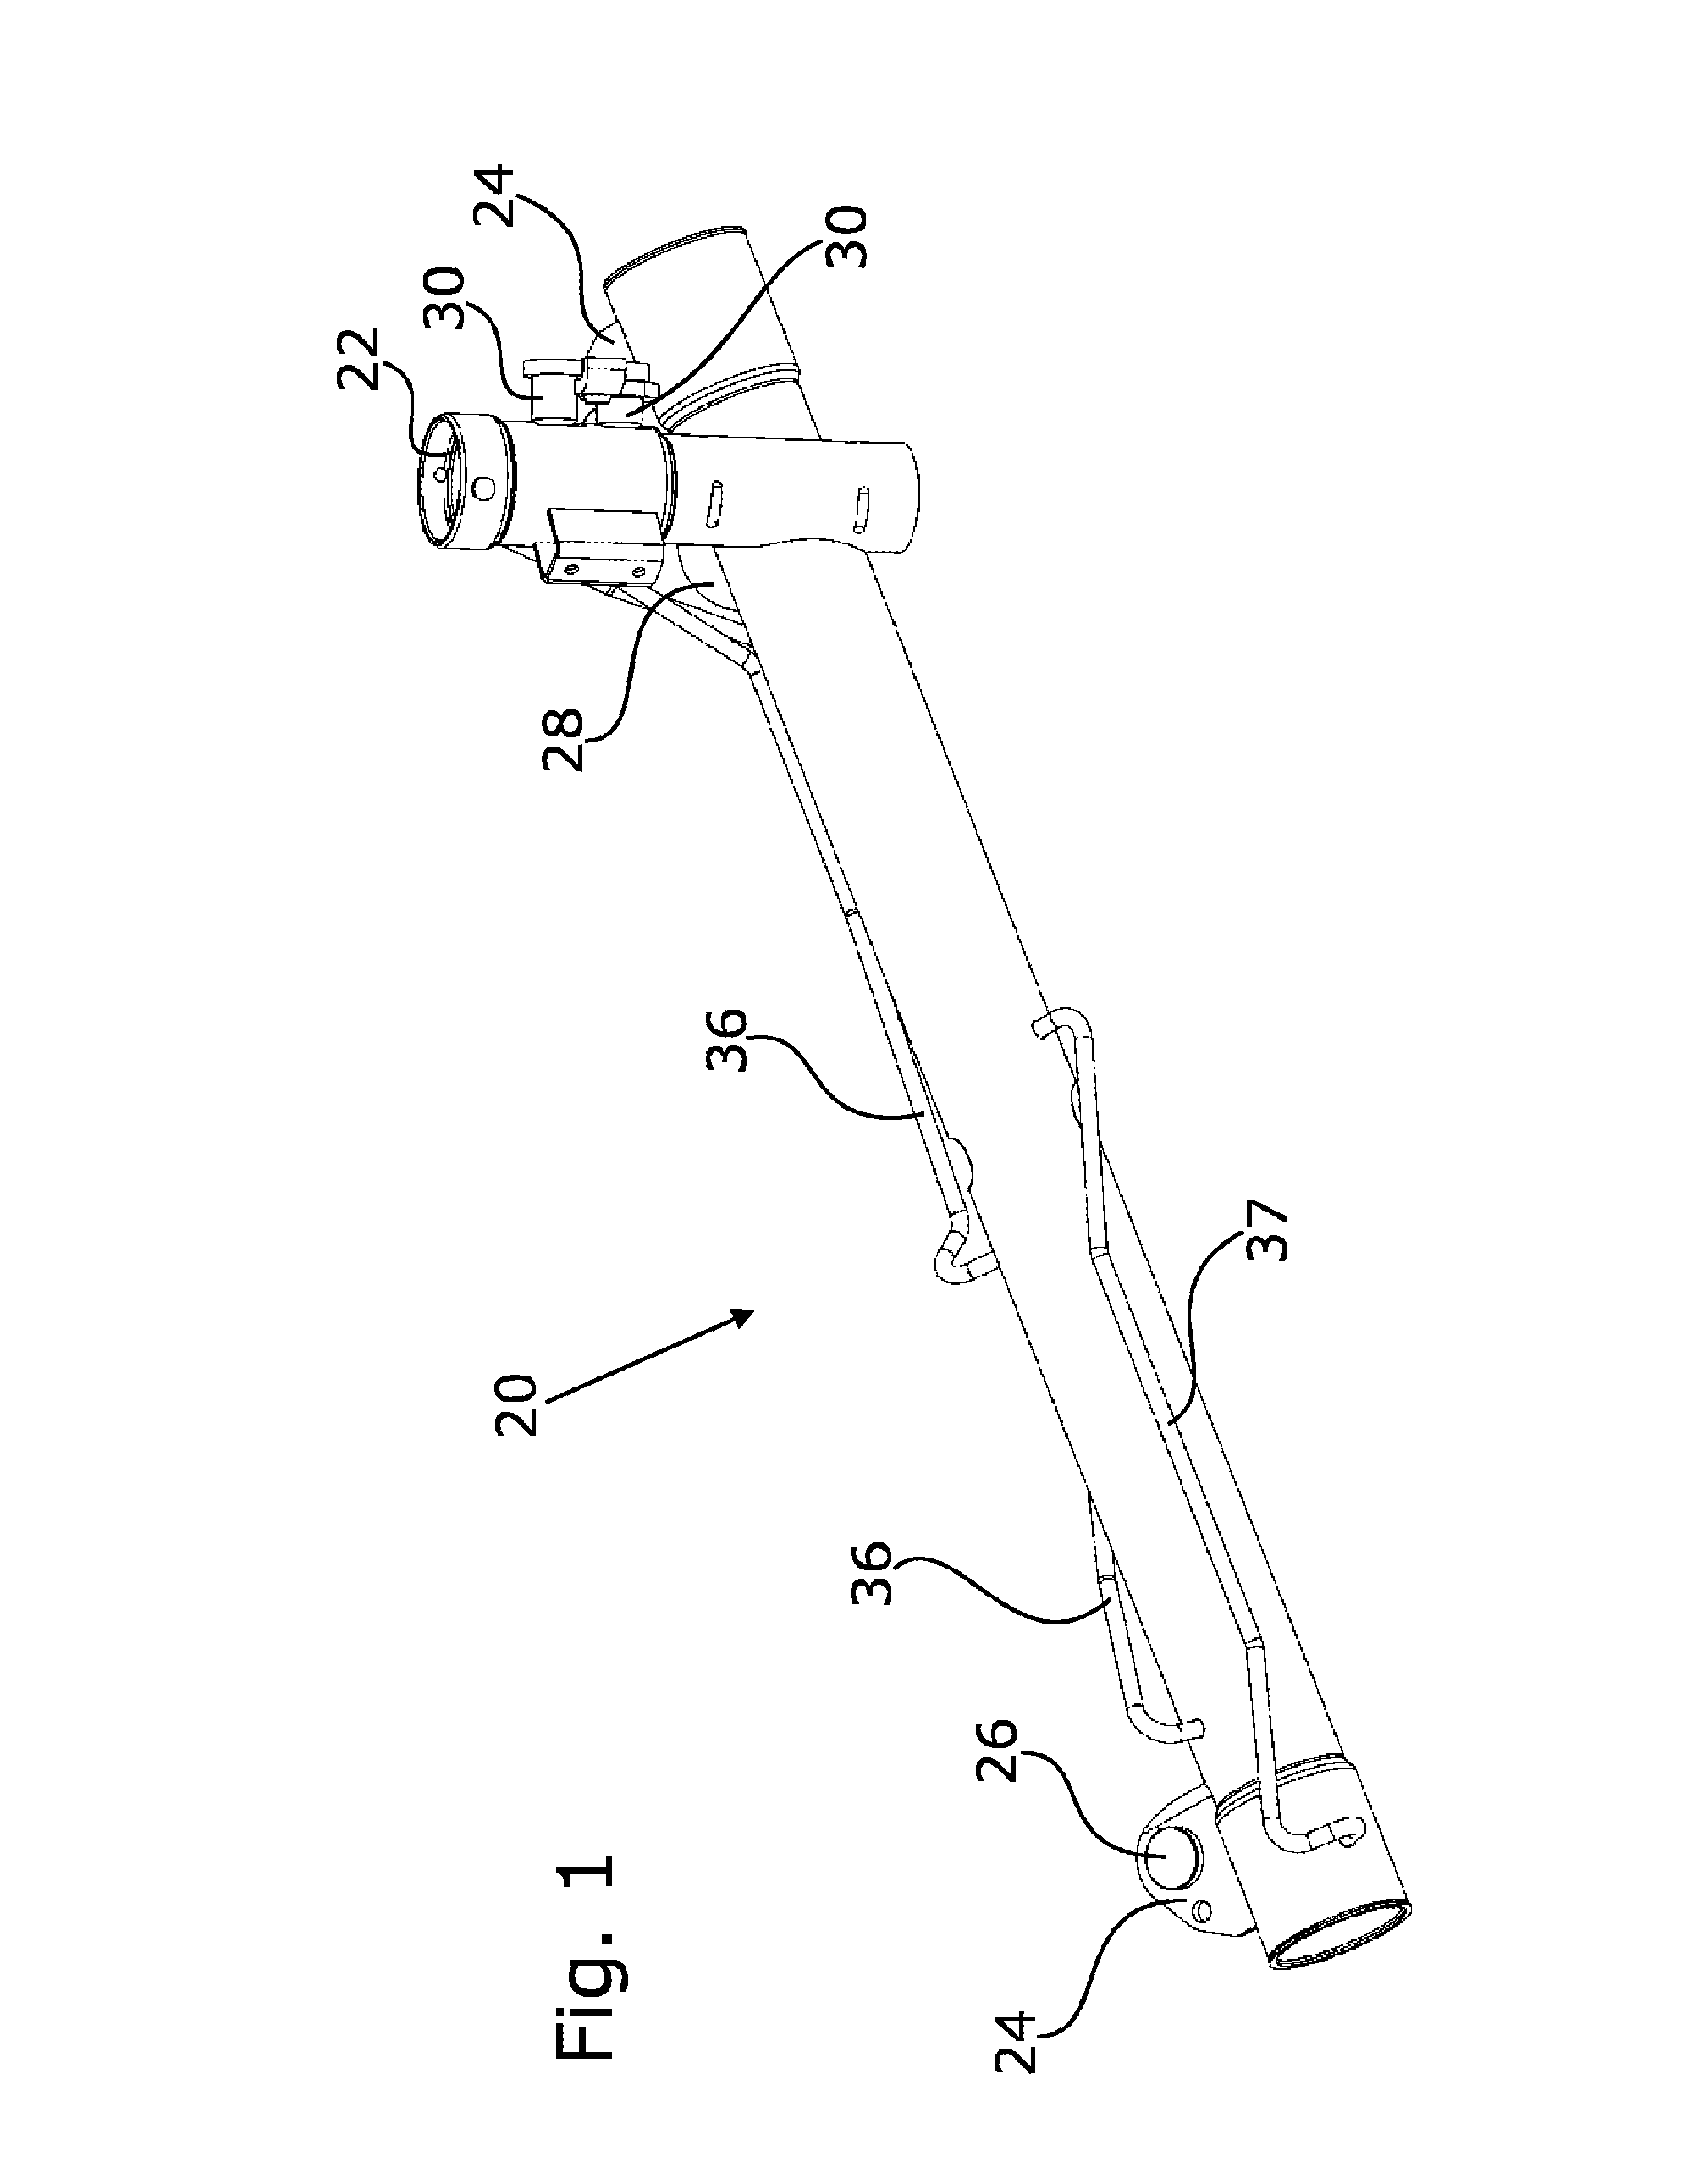 Method for attaching a supporting bearing in a steering rack housing for a power steering system